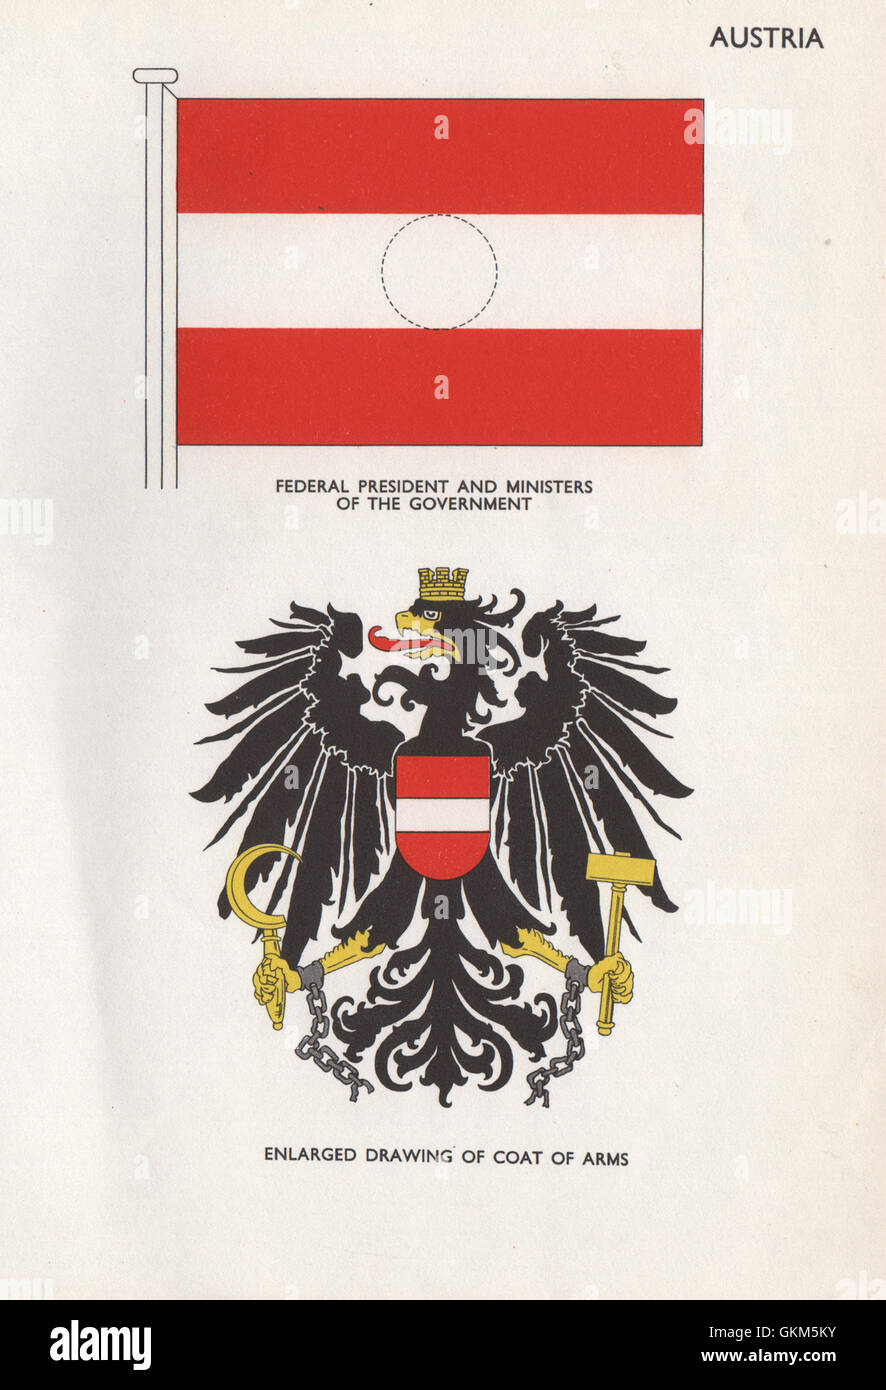 AUSTRIA FLAGS. Federal President. Ministers of the Government. Coat of Arms 1958 Stock Photo